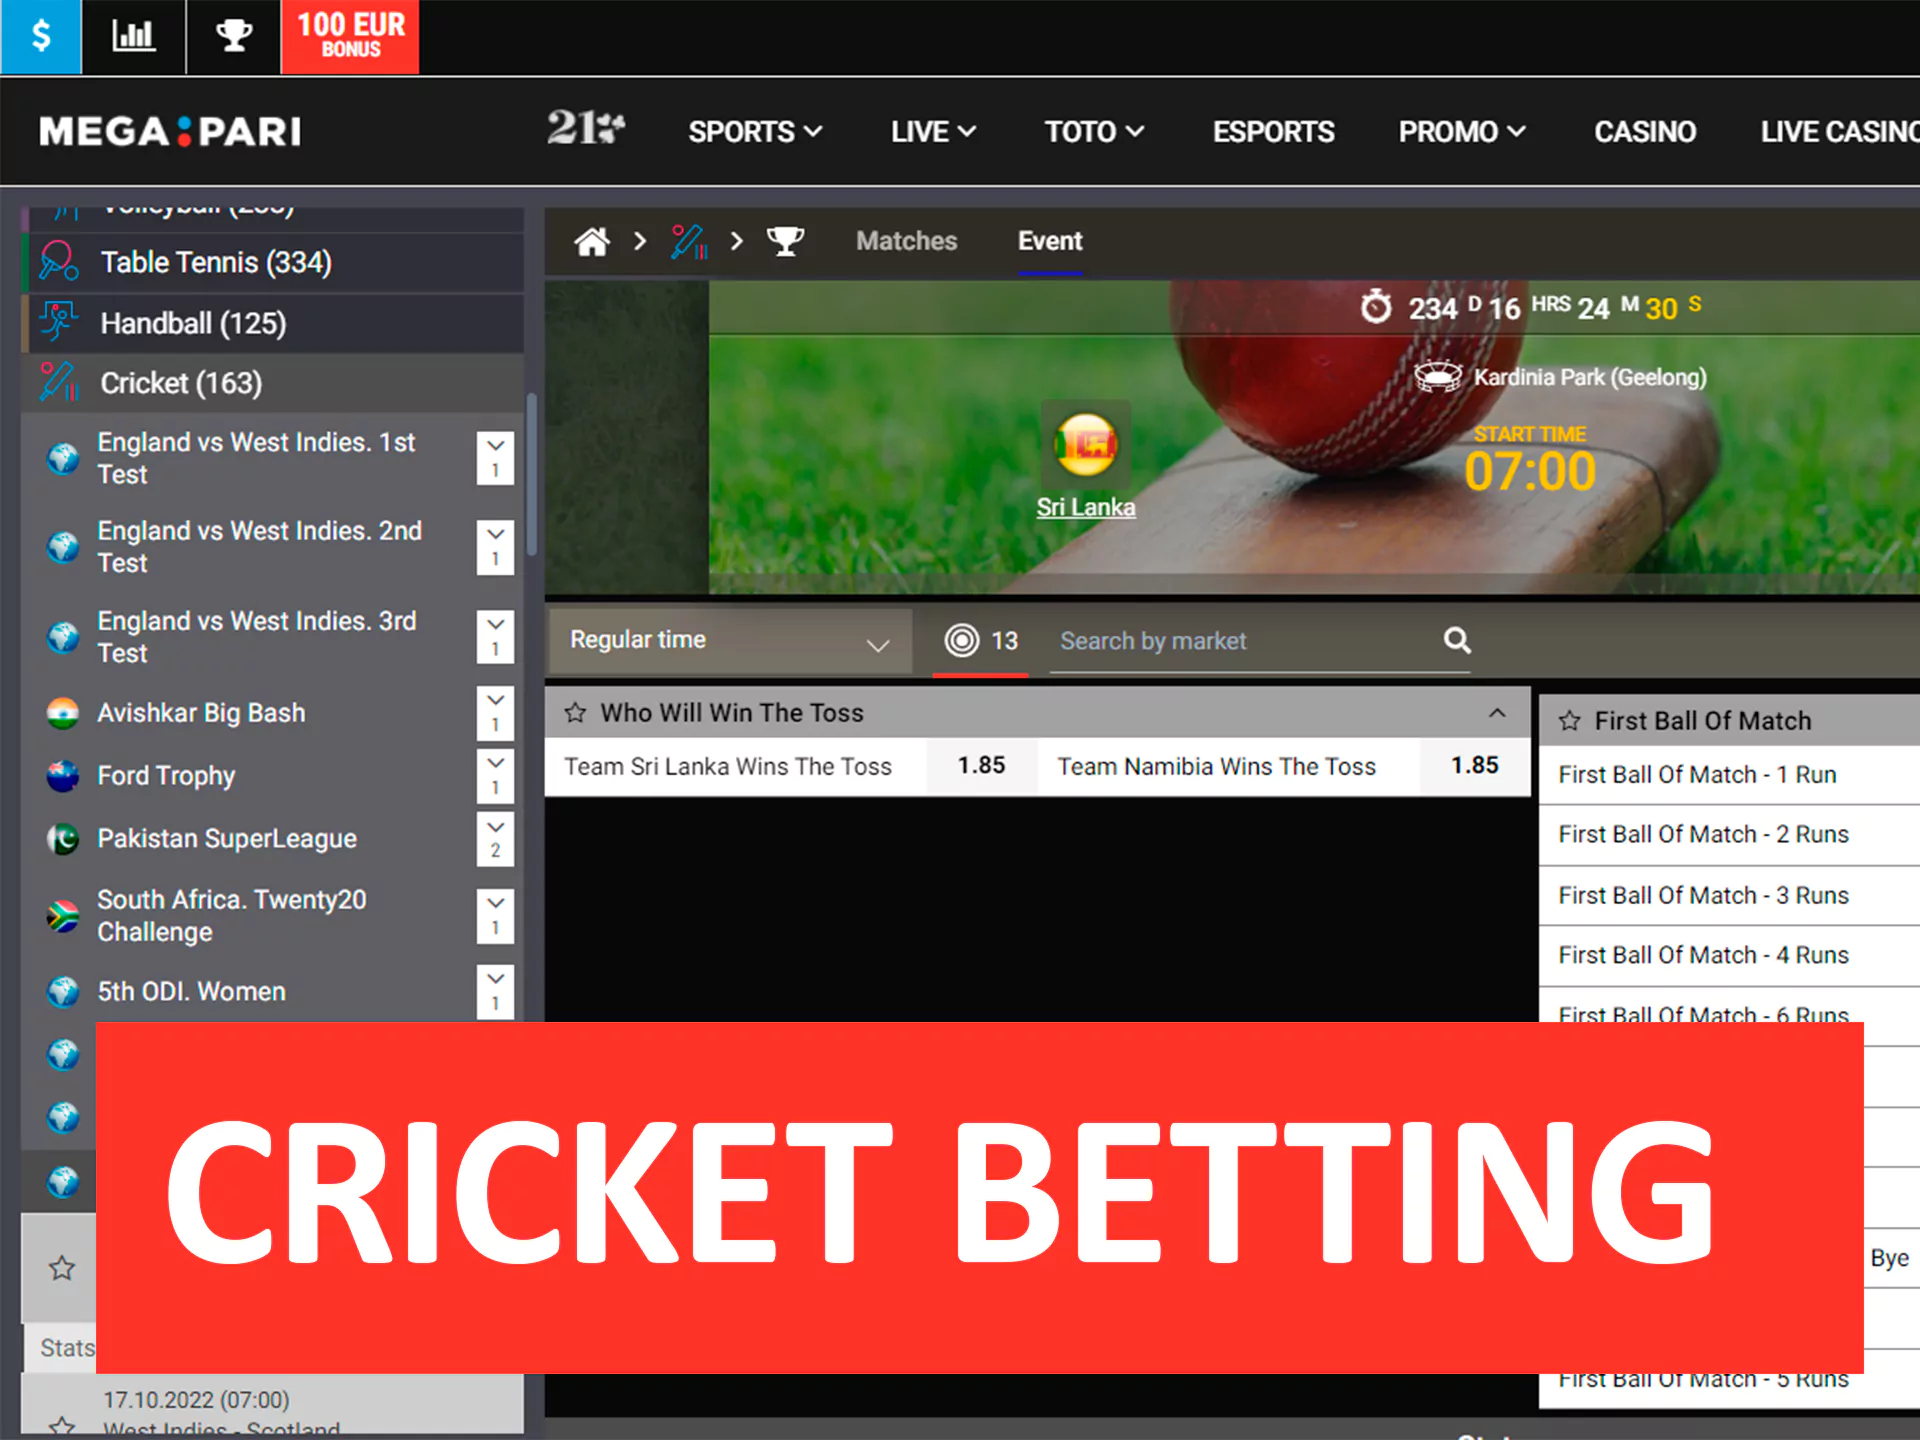 Place bets on cricket in the Mega Pari sportsbook.